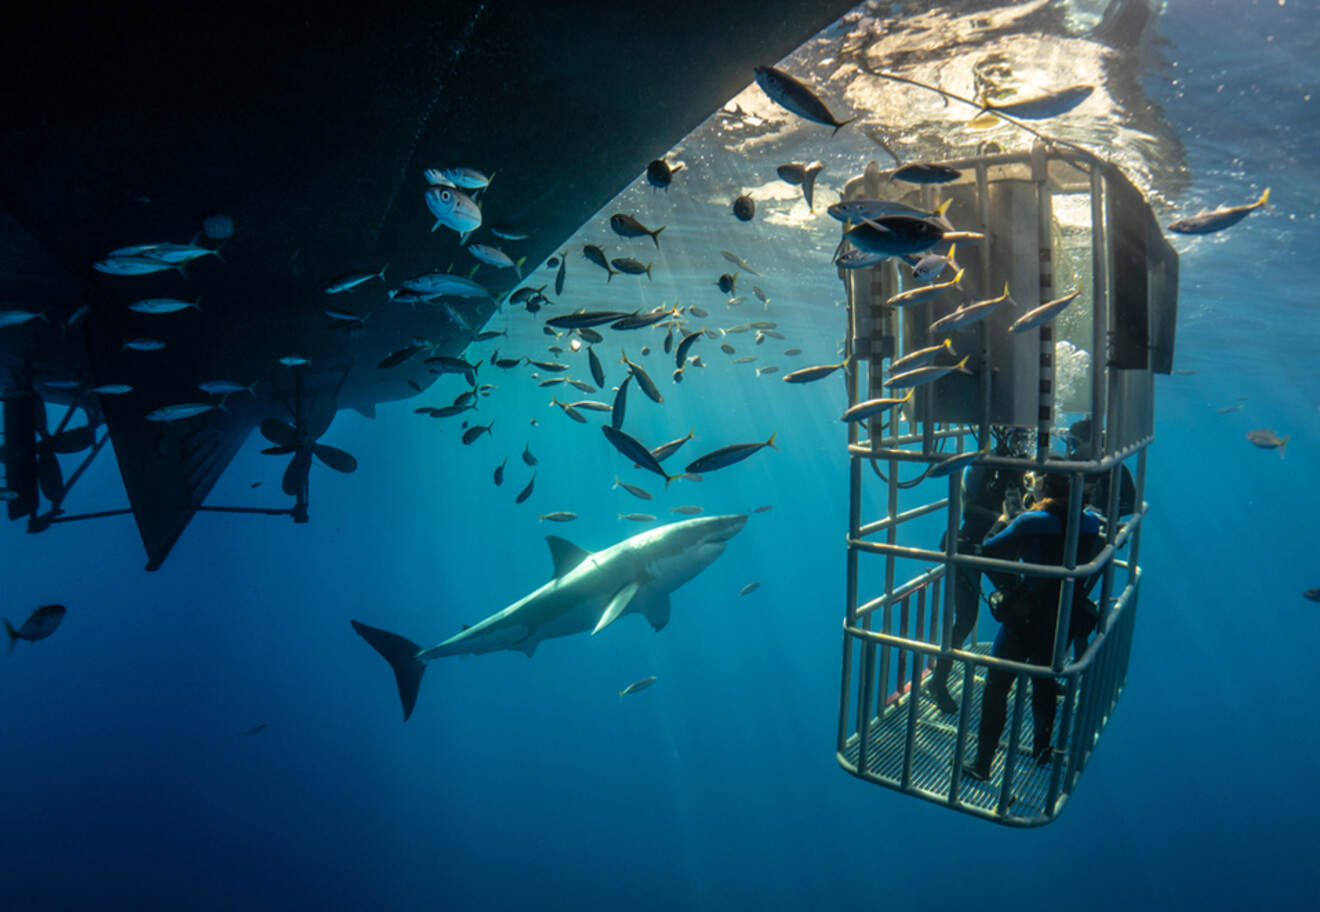 People in a cage underwater looking at sharks